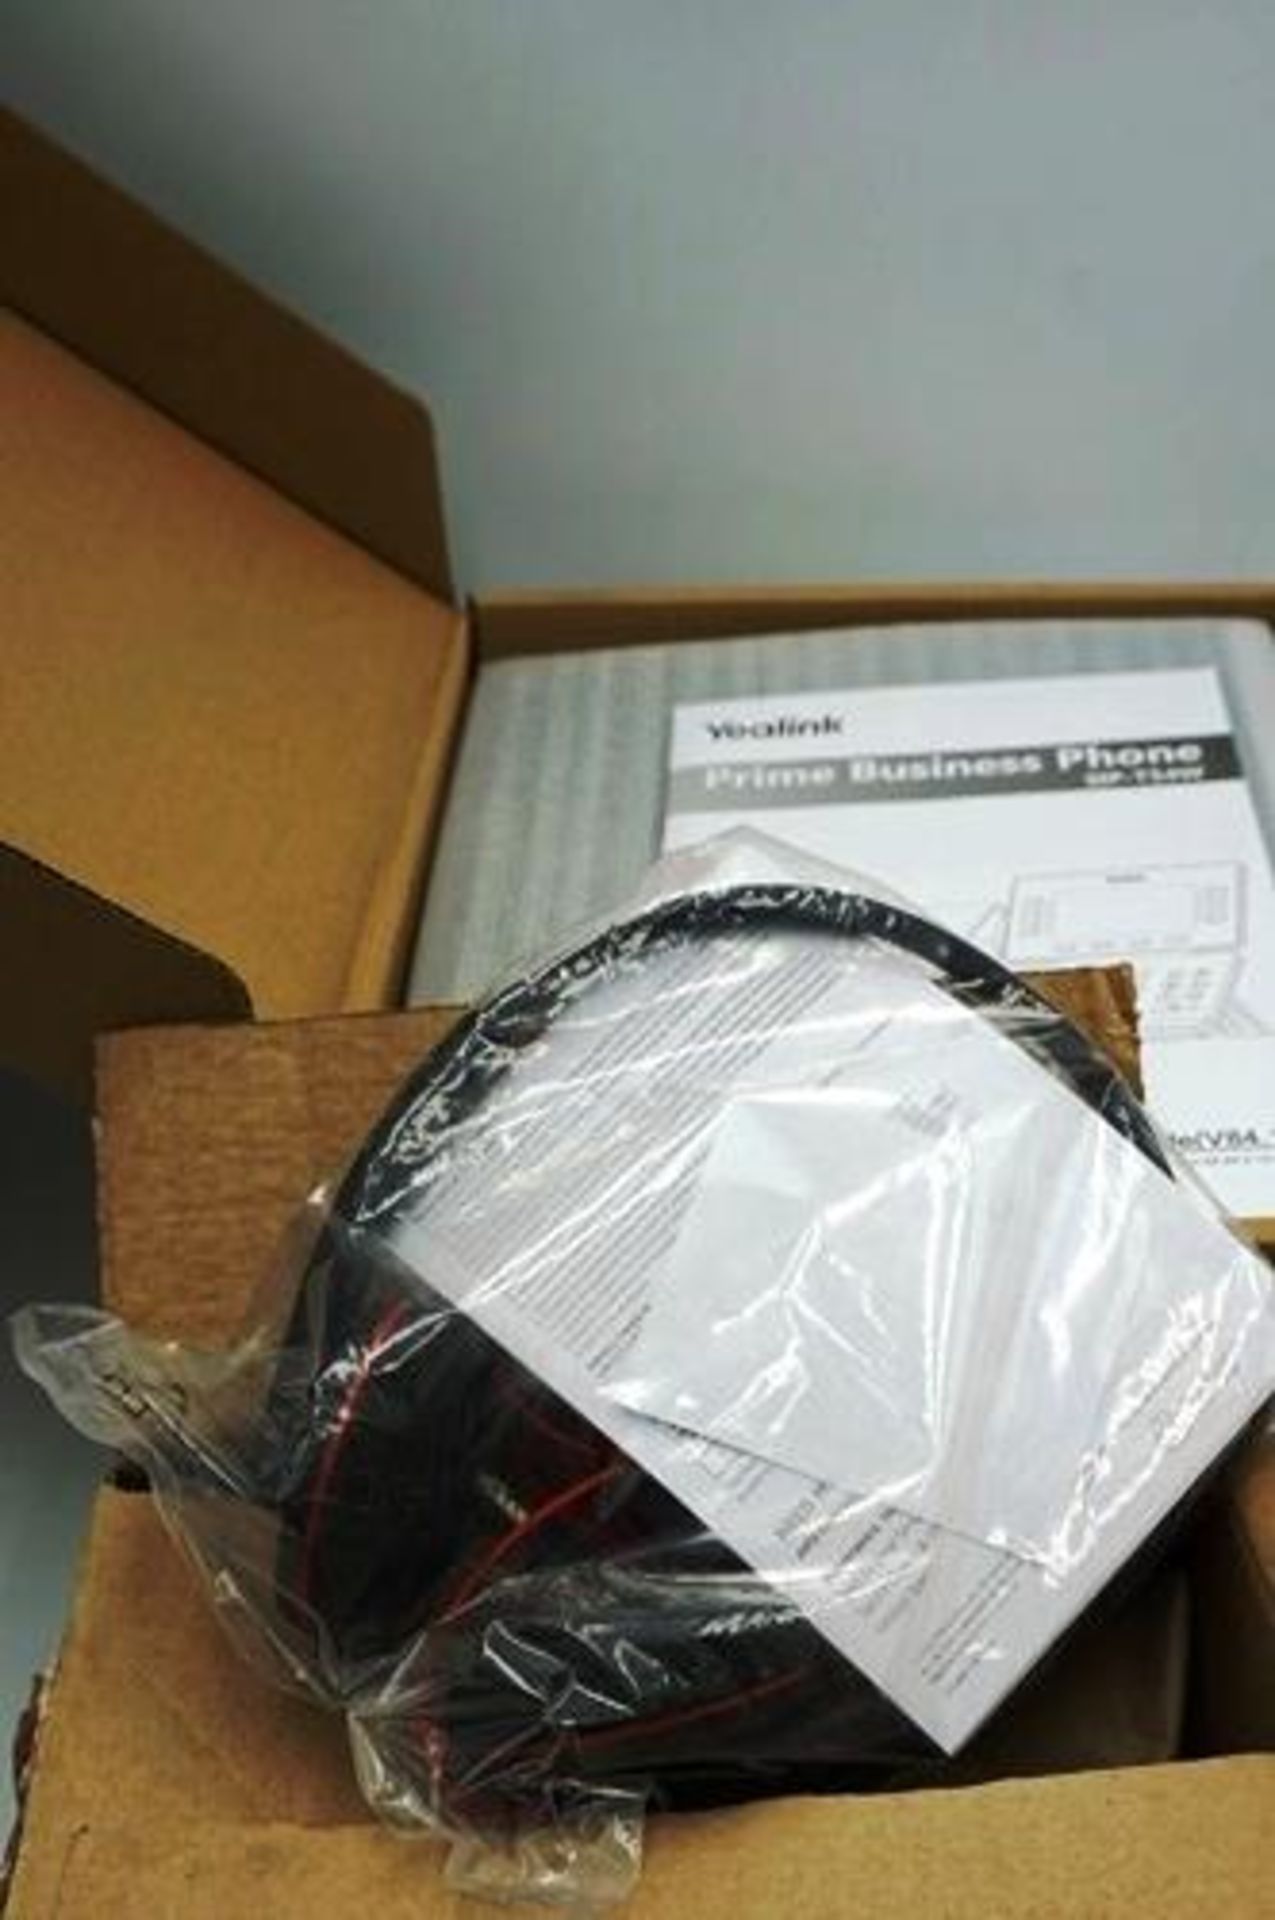 1 x Yeolink Prime Business phone, model SIP-T54W and 1 x Blackwire USB A headphones - New in box ( - Image 2 of 3